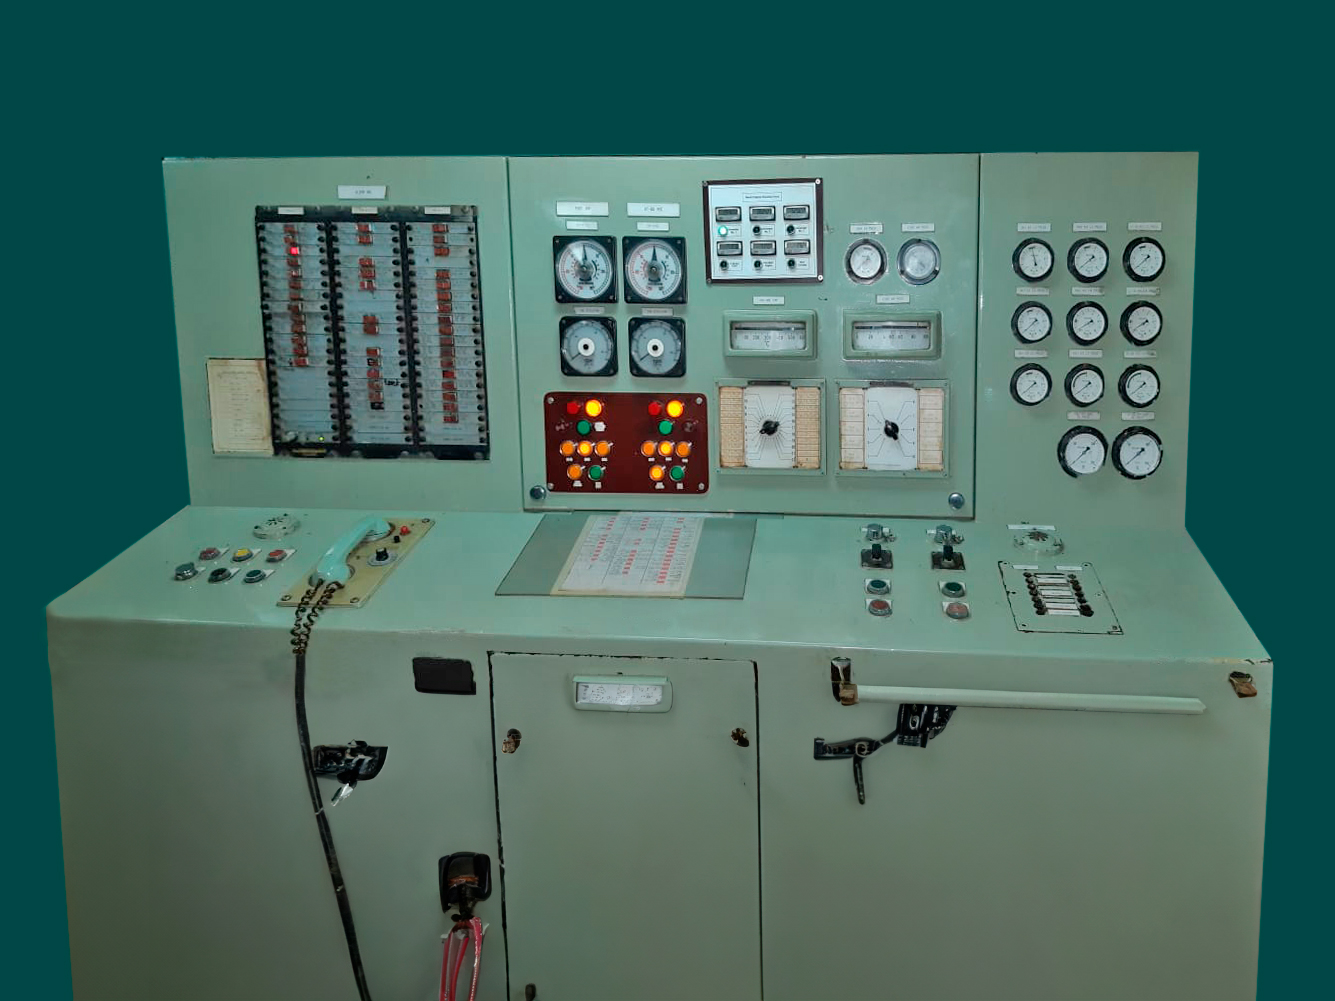 The image shows a engine room panel of an alarm and monitoring system of tanker